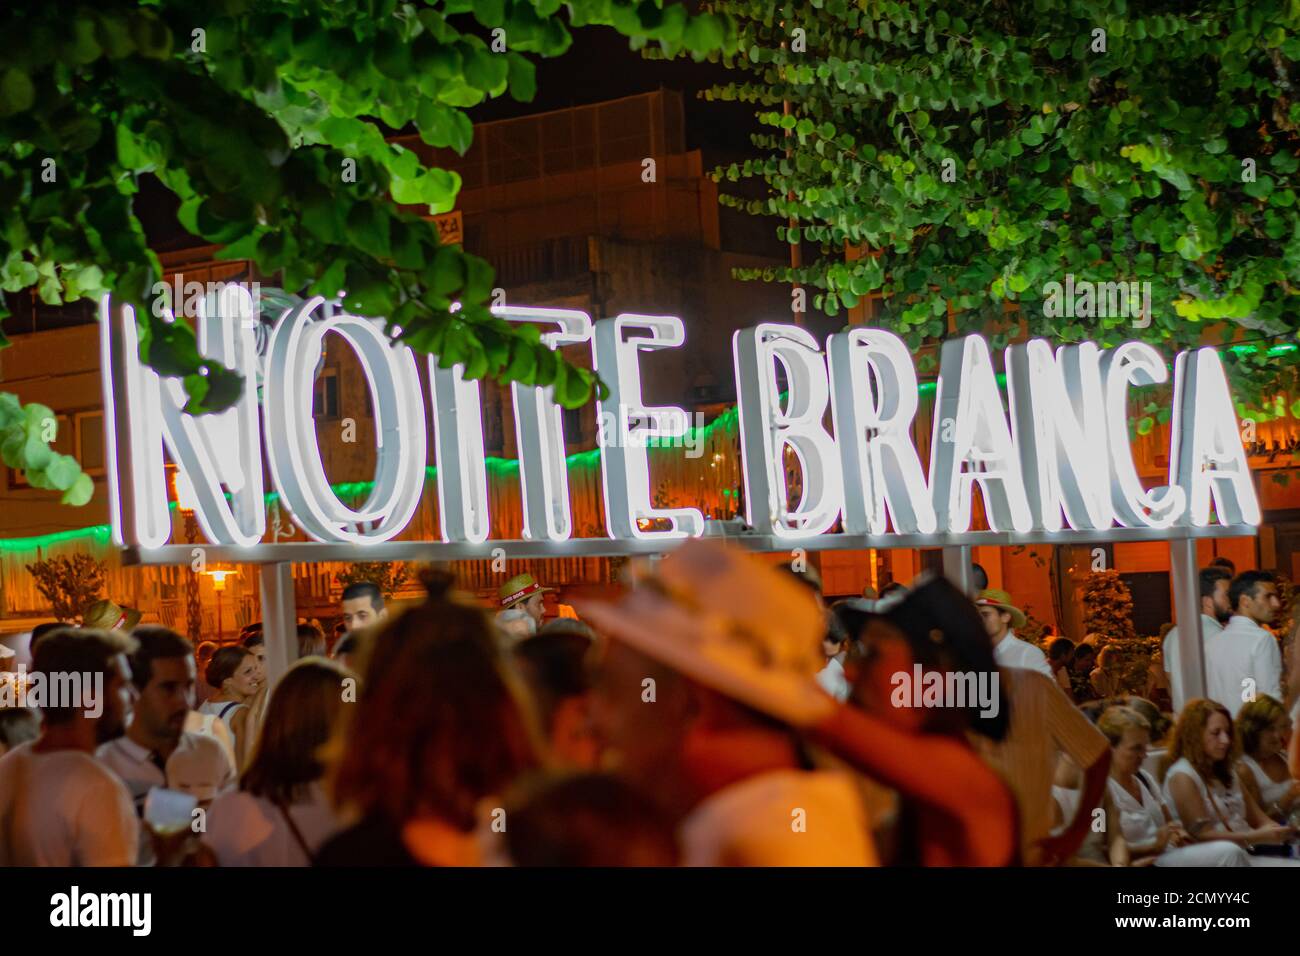 Noite Branca lighting sign event in city of Braga Portugal before covid19.  People reuniting om city social events Stock Photo - Alamy